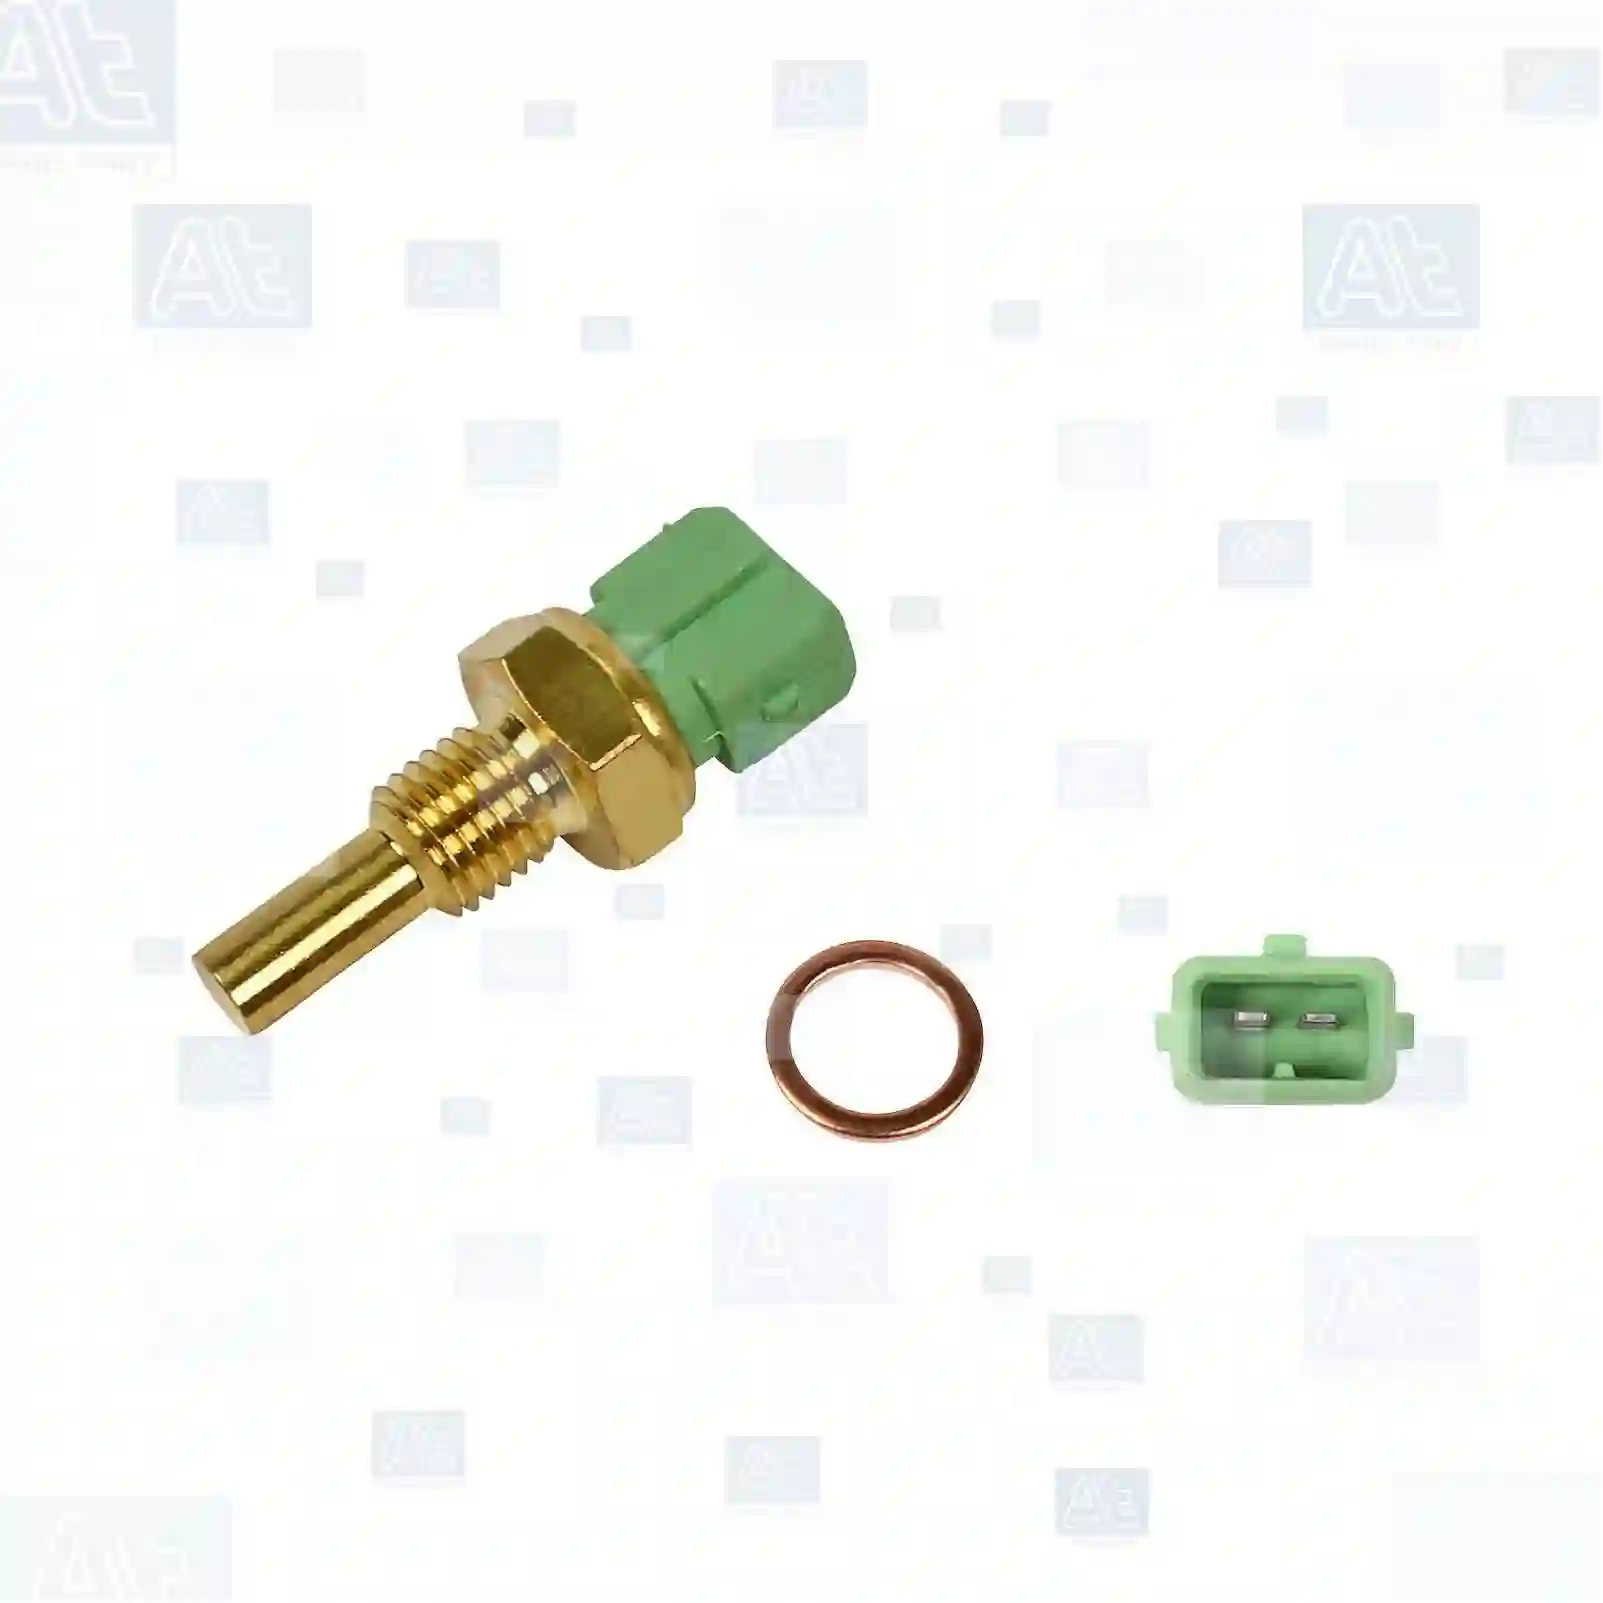 Temperature sensor, 77707155, 04393601, 04850371, 05972332, 07547977, 07695581, 07738223, 07770239, 09946866, 11911110100, 119111101000, 1953211010, 195321101000, 1953211010000, 46125769, 46477022, 605132050, 605233830, 60513205, 60523383, 60528383, 60800167, 60806379, 60808142, 60813751, 98424793, 820004, 004435008, 004435010, 025906041, 6U0919501, UE71610, 1284397, 1357414, 1401945, 1709966, 1709967, 13621284397, 13621357414, 13621401945, 13621709966, 13621709967, 13622242184, 90080939, 9160301, 45962029F, 00001338A5, 024246, 133857, 1338A5, 19203F, 0280130026, 39389002, 125380, 125769, 172750, 46477022, 4850371, 5972332, 60808142, 7547977, 7695581, 7770239, 98424793, 04393601, 04850371, 05972332, 06081220, 06081224, 07547977, 07695581, 07702239, 07738223, 07770239, 09946866, 30523666, 46125769, 46477022, 50009755, 5972332, 605132050, 605233830, 60513205, 60523383, 60528383, 60800167, 60806379, 60808142, 60813751, 98424793, 1207003, 1639283, 1957002, 1C1R-7H141-AA, 7072695, 94720065561, 1338444, 1338451, 1338458, 1338548, 30523666, 6238317, 90018835, 90080039, 90080939, 90410192, 90410792, 90411977, 90487859, 90510183, 9160301, 92017805, 9275979, 93184580, 93358883, 94205866, 96060084, 30506984, 30523666, 8942058660, 90410792, 90411977, 92017805, 37870-P5T-G00, 37870-PDF-E00, 37870-PDF-E01, 39220-22000, 39220-22010, 11023V0700, 2263010G00, 22630G2402, 22630G2404, 22630N4200, 46477022, 5972332, 98424793, 8-94205866-0, 04393601, 04850371, 05972332, 07738223, 46477022, 5972332, 60808142, 98424793, DAC4737, UKC2525, 45962029F, 0K737-18840, 39220-22000, 39220-22010, 39220-22020, 00125769, 04393601, 04850371, 05972332, 07547977, 07695581, 07770239, 09946866, 119111101000, 195321101000, 46125769, 46477022, 605132050, 605233830, 60513205, 60523383, 60528383, 60800167, 60806379, 60808142, 60813751, 98424793, ERR2081, 0770034, 89422-05010, 89422-05020, 470079800, AW311467, 29729460, 11023-G7000, 11023-V0700, 22630-10G00, 22630-G2402, 22630-G2404, 22630-N4200, 22630-P8100, 1338443, 1338444, 1338451, 1338458, 1338541, 1342850, 1738451, 4416020, 4500001, 6238317, 8933631, 8983631, 00001338A5, 024246, 133857, 1338A5, 19203F, 92860612501, 94460612500, 9966062239A, 0770287460, 5001865578, 7700267388, 7700582688, 7702087460, UE71610, ERR2081, GTR204, 4503132, 4770228, 756356, 7563562, 90510183, 91514549, 935702, 9357021, 004435008, 004435010, 025906041, 6U0919501, 004435008, 004435010, 025906041, 6U0919501, 55450, 55506, 22630AA000, 13650-60B00, 13650-60B00-000, 13650-84101, 13650-84101-000, 9141454980, 9151454980, A51454980, 89422-05010, 89422-05020, 1306937, 13069370, 1332396, 13323960, 13323969, 004435008, 004435010, 025906041, 026906161, 6U0919501 ||  77707155 At Spare Part | Engine, Accelerator Pedal, Camshaft, Connecting Rod, Crankcase, Crankshaft, Cylinder Head, Engine Suspension Mountings, Exhaust Manifold, Exhaust Gas Recirculation, Filter Kits, Flywheel Housing, General Overhaul Kits, Engine, Intake Manifold, Oil Cleaner, Oil Cooler, Oil Filter, Oil Pump, Oil Sump, Piston & Liner, Sensor & Switch, Timing Case, Turbocharger, Cooling System, Belt Tensioner, Coolant Filter, Coolant Pipe, Corrosion Prevention Agent, Drive, Expansion Tank, Fan, Intercooler, Monitors & Gauges, Radiator, Thermostat, V-Belt / Timing belt, Water Pump, Fuel System, Electronical Injector Unit, Feed Pump, Fuel Filter, cpl., Fuel Gauge Sender,  Fuel Line, Fuel Pump, Fuel Tank, Injection Line Kit, Injection Pump, Exhaust System, Clutch & Pedal, Gearbox, Propeller Shaft, Axles, Brake System, Hubs & Wheels, Suspension, Leaf Spring, Universal Parts / Accessories, Steering, Electrical System, Cabin Temperature sensor, 77707155, 04393601, 04850371, 05972332, 07547977, 07695581, 07738223, 07770239, 09946866, 11911110100, 119111101000, 1953211010, 195321101000, 1953211010000, 46125769, 46477022, 605132050, 605233830, 60513205, 60523383, 60528383, 60800167, 60806379, 60808142, 60813751, 98424793, 820004, 004435008, 004435010, 025906041, 6U0919501, UE71610, 1284397, 1357414, 1401945, 1709966, 1709967, 13621284397, 13621357414, 13621401945, 13621709966, 13621709967, 13622242184, 90080939, 9160301, 45962029F, 00001338A5, 024246, 133857, 1338A5, 19203F, 0280130026, 39389002, 125380, 125769, 172750, 46477022, 4850371, 5972332, 60808142, 7547977, 7695581, 7770239, 98424793, 04393601, 04850371, 05972332, 06081220, 06081224, 07547977, 07695581, 07702239, 07738223, 07770239, 09946866, 30523666, 46125769, 46477022, 50009755, 5972332, 605132050, 605233830, 60513205, 60523383, 60528383, 60800167, 60806379, 60808142, 60813751, 98424793, 1207003, 1639283, 1957002, 1C1R-7H141-AA, 7072695, 94720065561, 1338444, 1338451, 1338458, 1338548, 30523666, 6238317, 90018835, 90080039, 90080939, 90410192, 90410792, 90411977, 90487859, 90510183, 9160301, 92017805, 9275979, 93184580, 93358883, 94205866, 96060084, 30506984, 30523666, 8942058660, 90410792, 90411977, 92017805, 37870-P5T-G00, 37870-PDF-E00, 37870-PDF-E01, 39220-22000, 39220-22010, 11023V0700, 2263010G00, 22630G2402, 22630G2404, 22630N4200, 46477022, 5972332, 98424793, 8-94205866-0, 04393601, 04850371, 05972332, 07738223, 46477022, 5972332, 60808142, 98424793, DAC4737, UKC2525, 45962029F, 0K737-18840, 39220-22000, 39220-22010, 39220-22020, 00125769, 04393601, 04850371, 05972332, 07547977, 07695581, 07770239, 09946866, 119111101000, 195321101000, 46125769, 46477022, 605132050, 605233830, 60513205, 60523383, 60528383, 60800167, 60806379, 60808142, 60813751, 98424793, ERR2081, 0770034, 89422-05010, 89422-05020, 470079800, AW311467, 29729460, 11023-G7000, 11023-V0700, 22630-10G00, 22630-G2402, 22630-G2404, 22630-N4200, 22630-P8100, 1338443, 1338444, 1338451, 1338458, 1338541, 1342850, 1738451, 4416020, 4500001, 6238317, 8933631, 8983631, 00001338A5, 024246, 133857, 1338A5, 19203F, 92860612501, 94460612500, 9966062239A, 0770287460, 5001865578, 7700267388, 7700582688, 7702087460, UE71610, ERR2081, GTR204, 4503132, 4770228, 756356, 7563562, 90510183, 91514549, 935702, 9357021, 004435008, 004435010, 025906041, 6U0919501, 004435008, 004435010, 025906041, 6U0919501, 55450, 55506, 22630AA000, 13650-60B00, 13650-60B00-000, 13650-84101, 13650-84101-000, 9141454980, 9151454980, A51454980, 89422-05010, 89422-05020, 1306937, 13069370, 1332396, 13323960, 13323969, 004435008, 004435010, 025906041, 026906161, 6U0919501 ||  77707155 At Spare Part | Engine, Accelerator Pedal, Camshaft, Connecting Rod, Crankcase, Crankshaft, Cylinder Head, Engine Suspension Mountings, Exhaust Manifold, Exhaust Gas Recirculation, Filter Kits, Flywheel Housing, General Overhaul Kits, Engine, Intake Manifold, Oil Cleaner, Oil Cooler, Oil Filter, Oil Pump, Oil Sump, Piston & Liner, Sensor & Switch, Timing Case, Turbocharger, Cooling System, Belt Tensioner, Coolant Filter, Coolant Pipe, Corrosion Prevention Agent, Drive, Expansion Tank, Fan, Intercooler, Monitors & Gauges, Radiator, Thermostat, V-Belt / Timing belt, Water Pump, Fuel System, Electronical Injector Unit, Feed Pump, Fuel Filter, cpl., Fuel Gauge Sender,  Fuel Line, Fuel Pump, Fuel Tank, Injection Line Kit, Injection Pump, Exhaust System, Clutch & Pedal, Gearbox, Propeller Shaft, Axles, Brake System, Hubs & Wheels, Suspension, Leaf Spring, Universal Parts / Accessories, Steering, Electrical System, Cabin